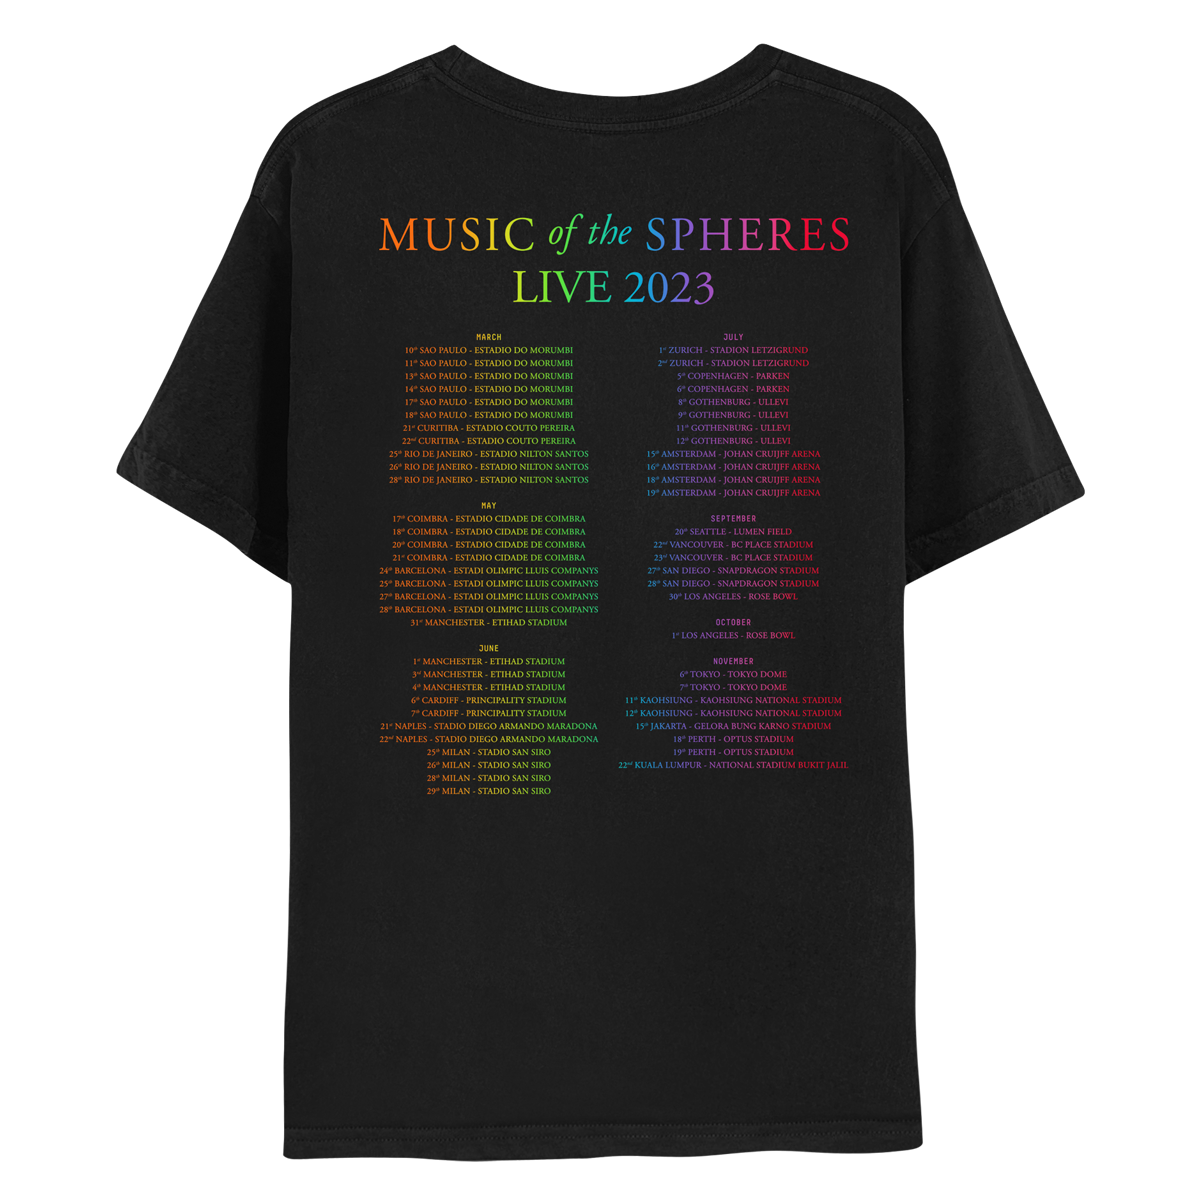 Vancouver Music of the Spheres Limited Edition Tour Tee